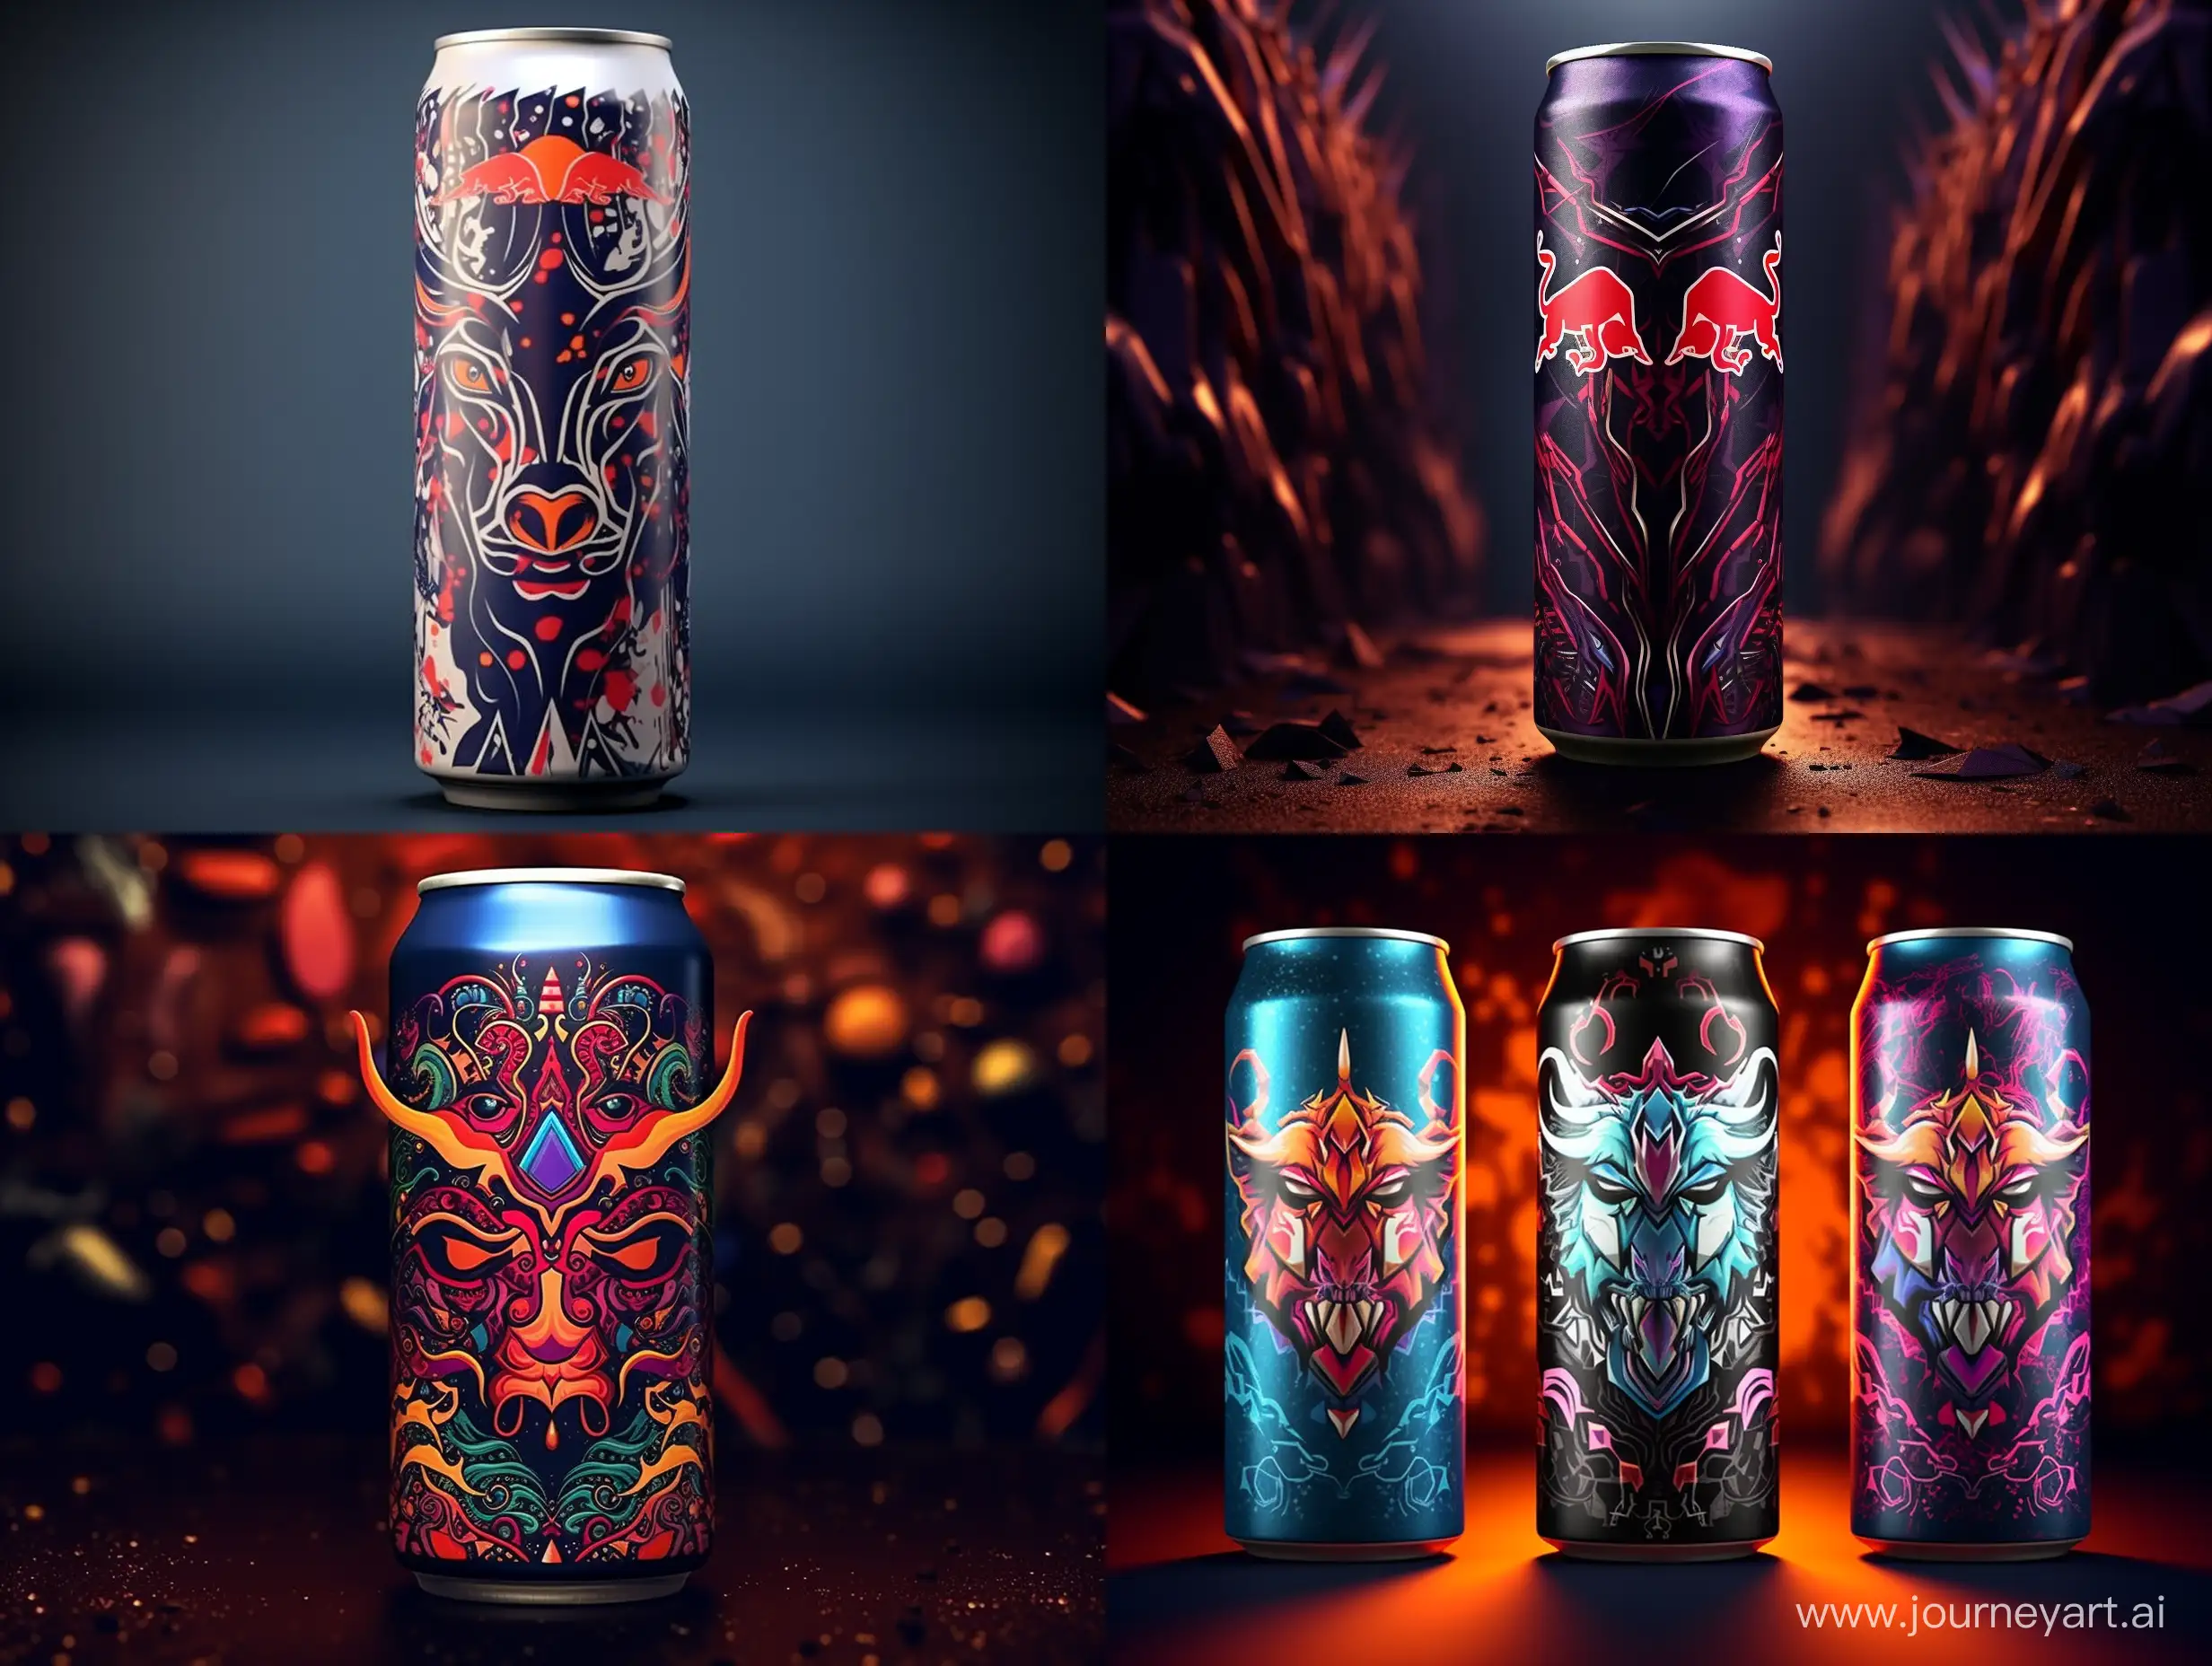 an energy drink that has vitamins in it that is beneficial to gain focus and concentration. a cool design with lots of colors. Looks a little like red bull. 